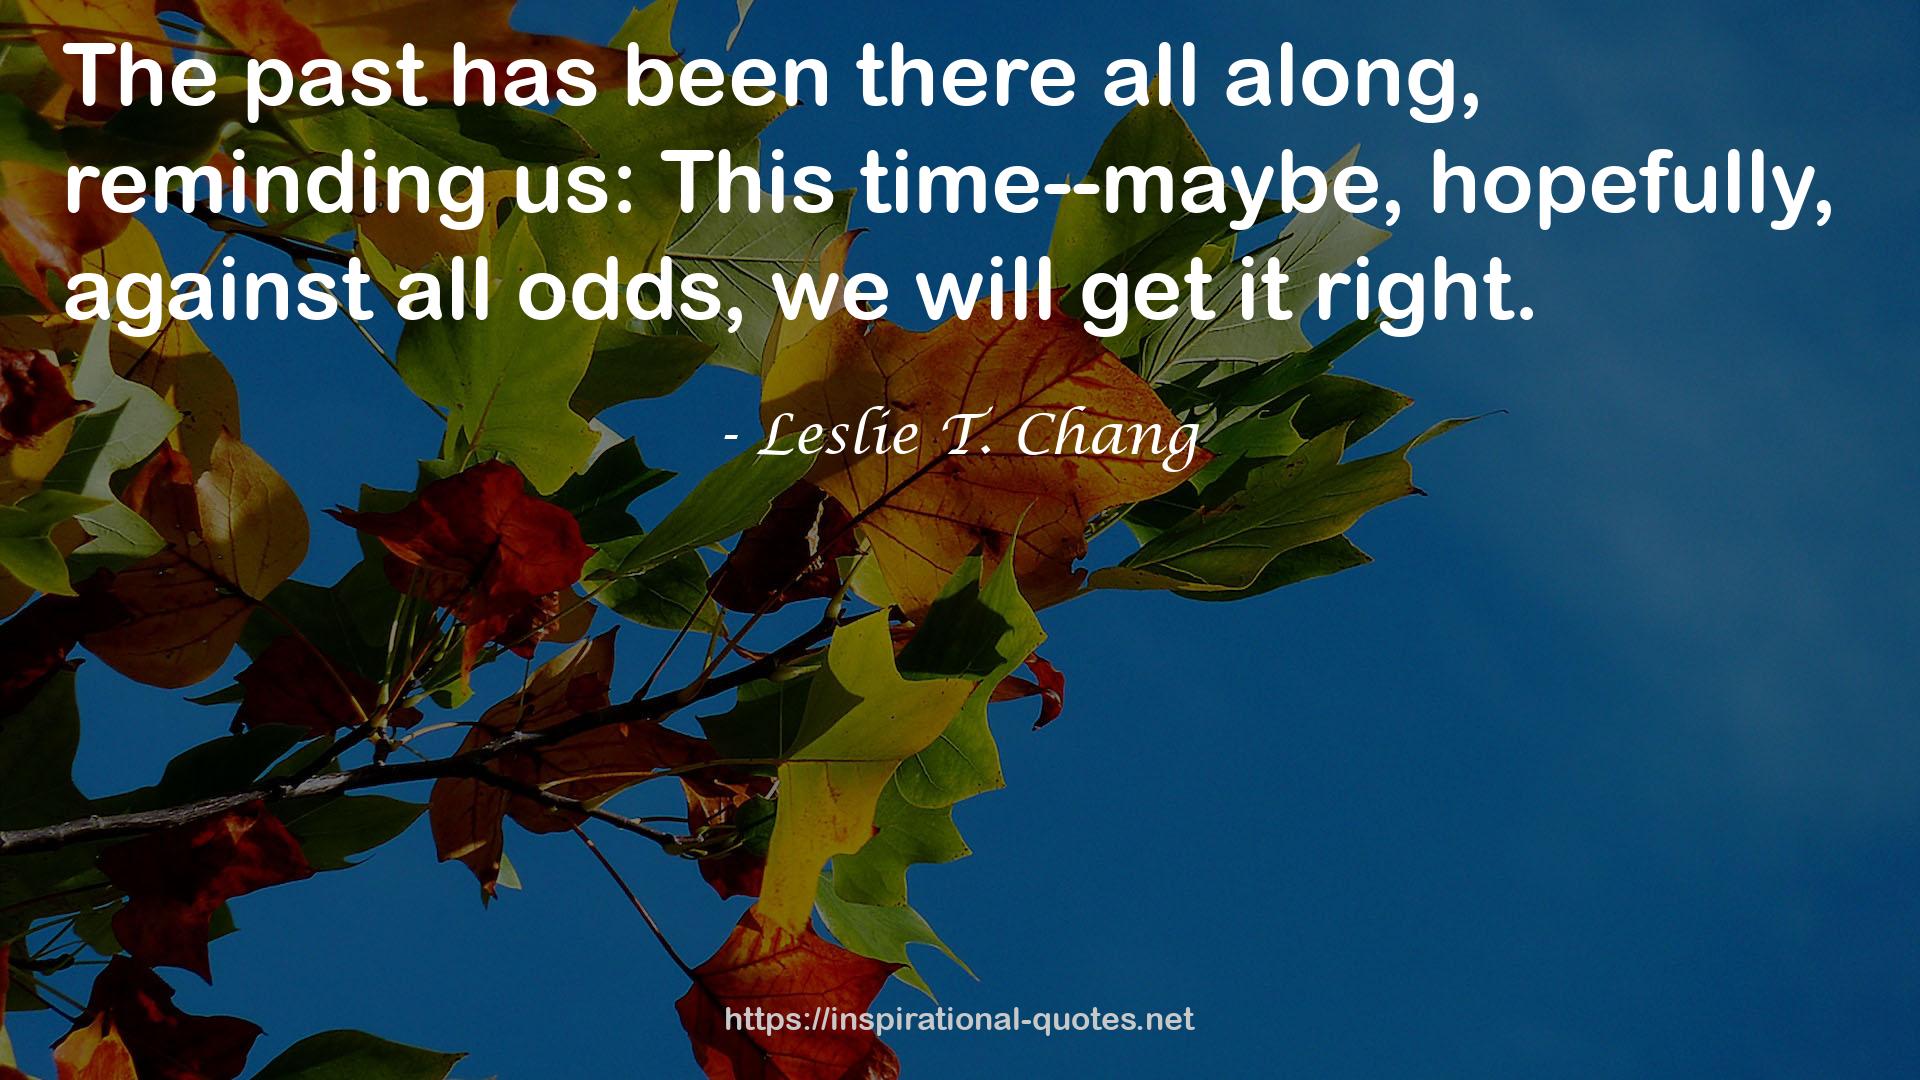 Leslie T. Chang QUOTES